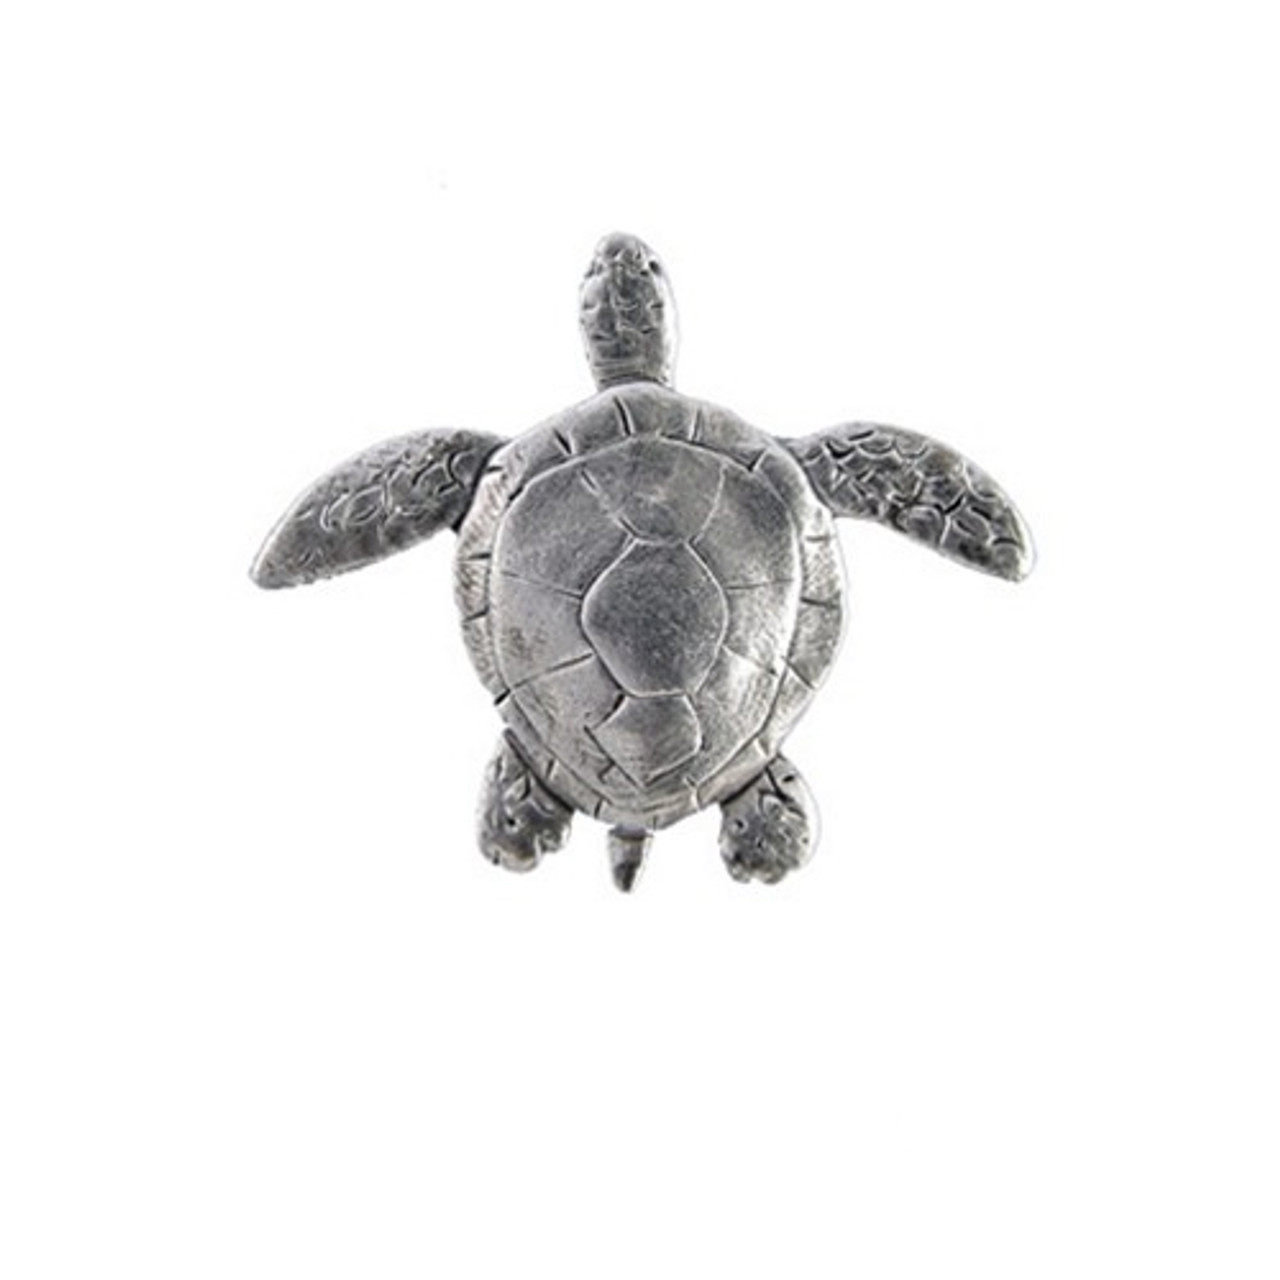 Pewter Sea Turtle Pin - Turtle Jewelry Brooch - TheMagicZoo.com